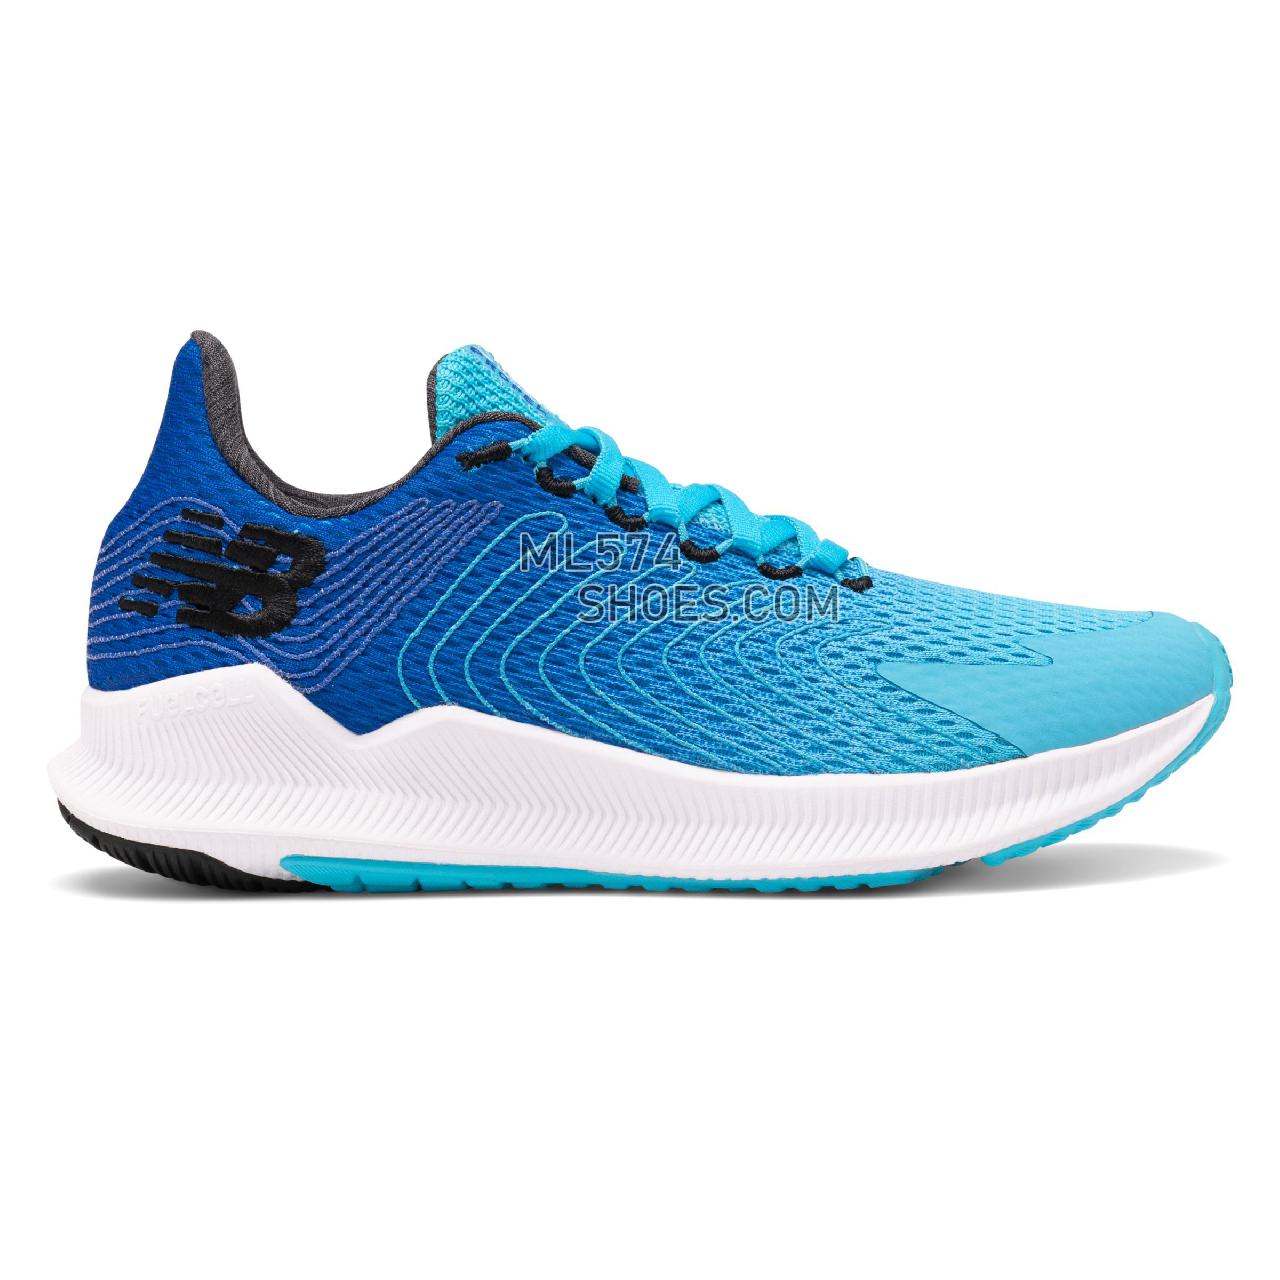 New Balance FuelCell Propel - Women's Neutral Running - Bayside with UV Blue and Black - WFCPRBB1